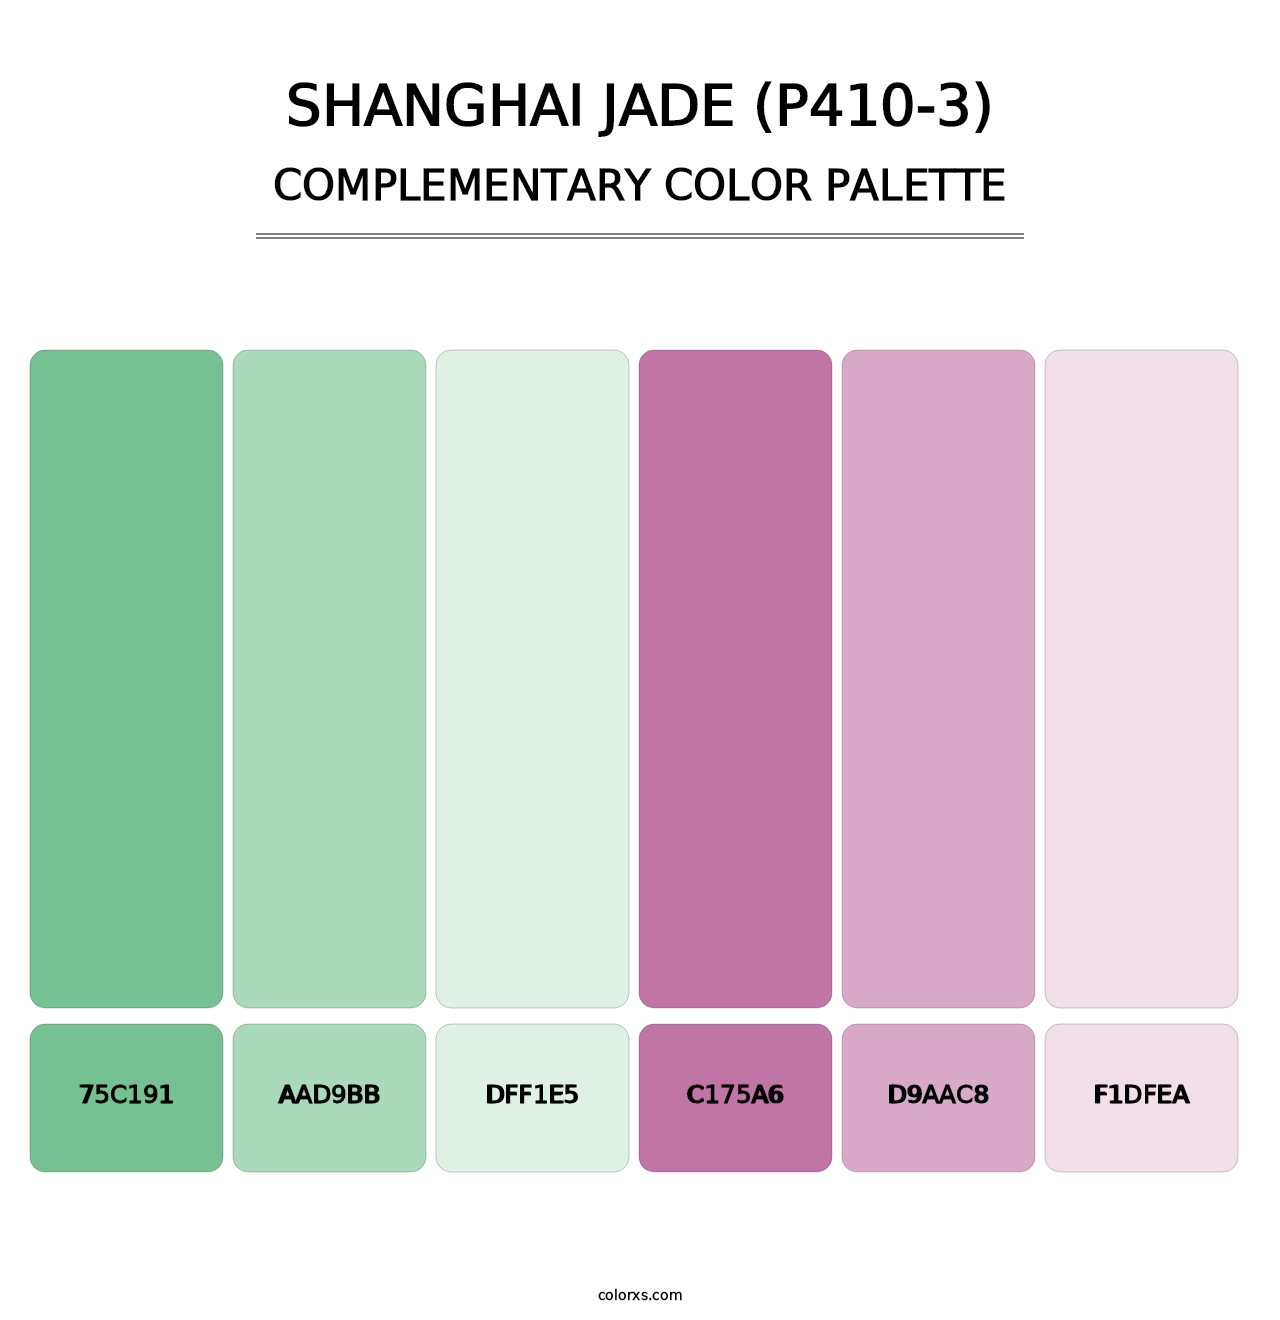 Shanghai Jade (P410-3) - Complementary Color Palette